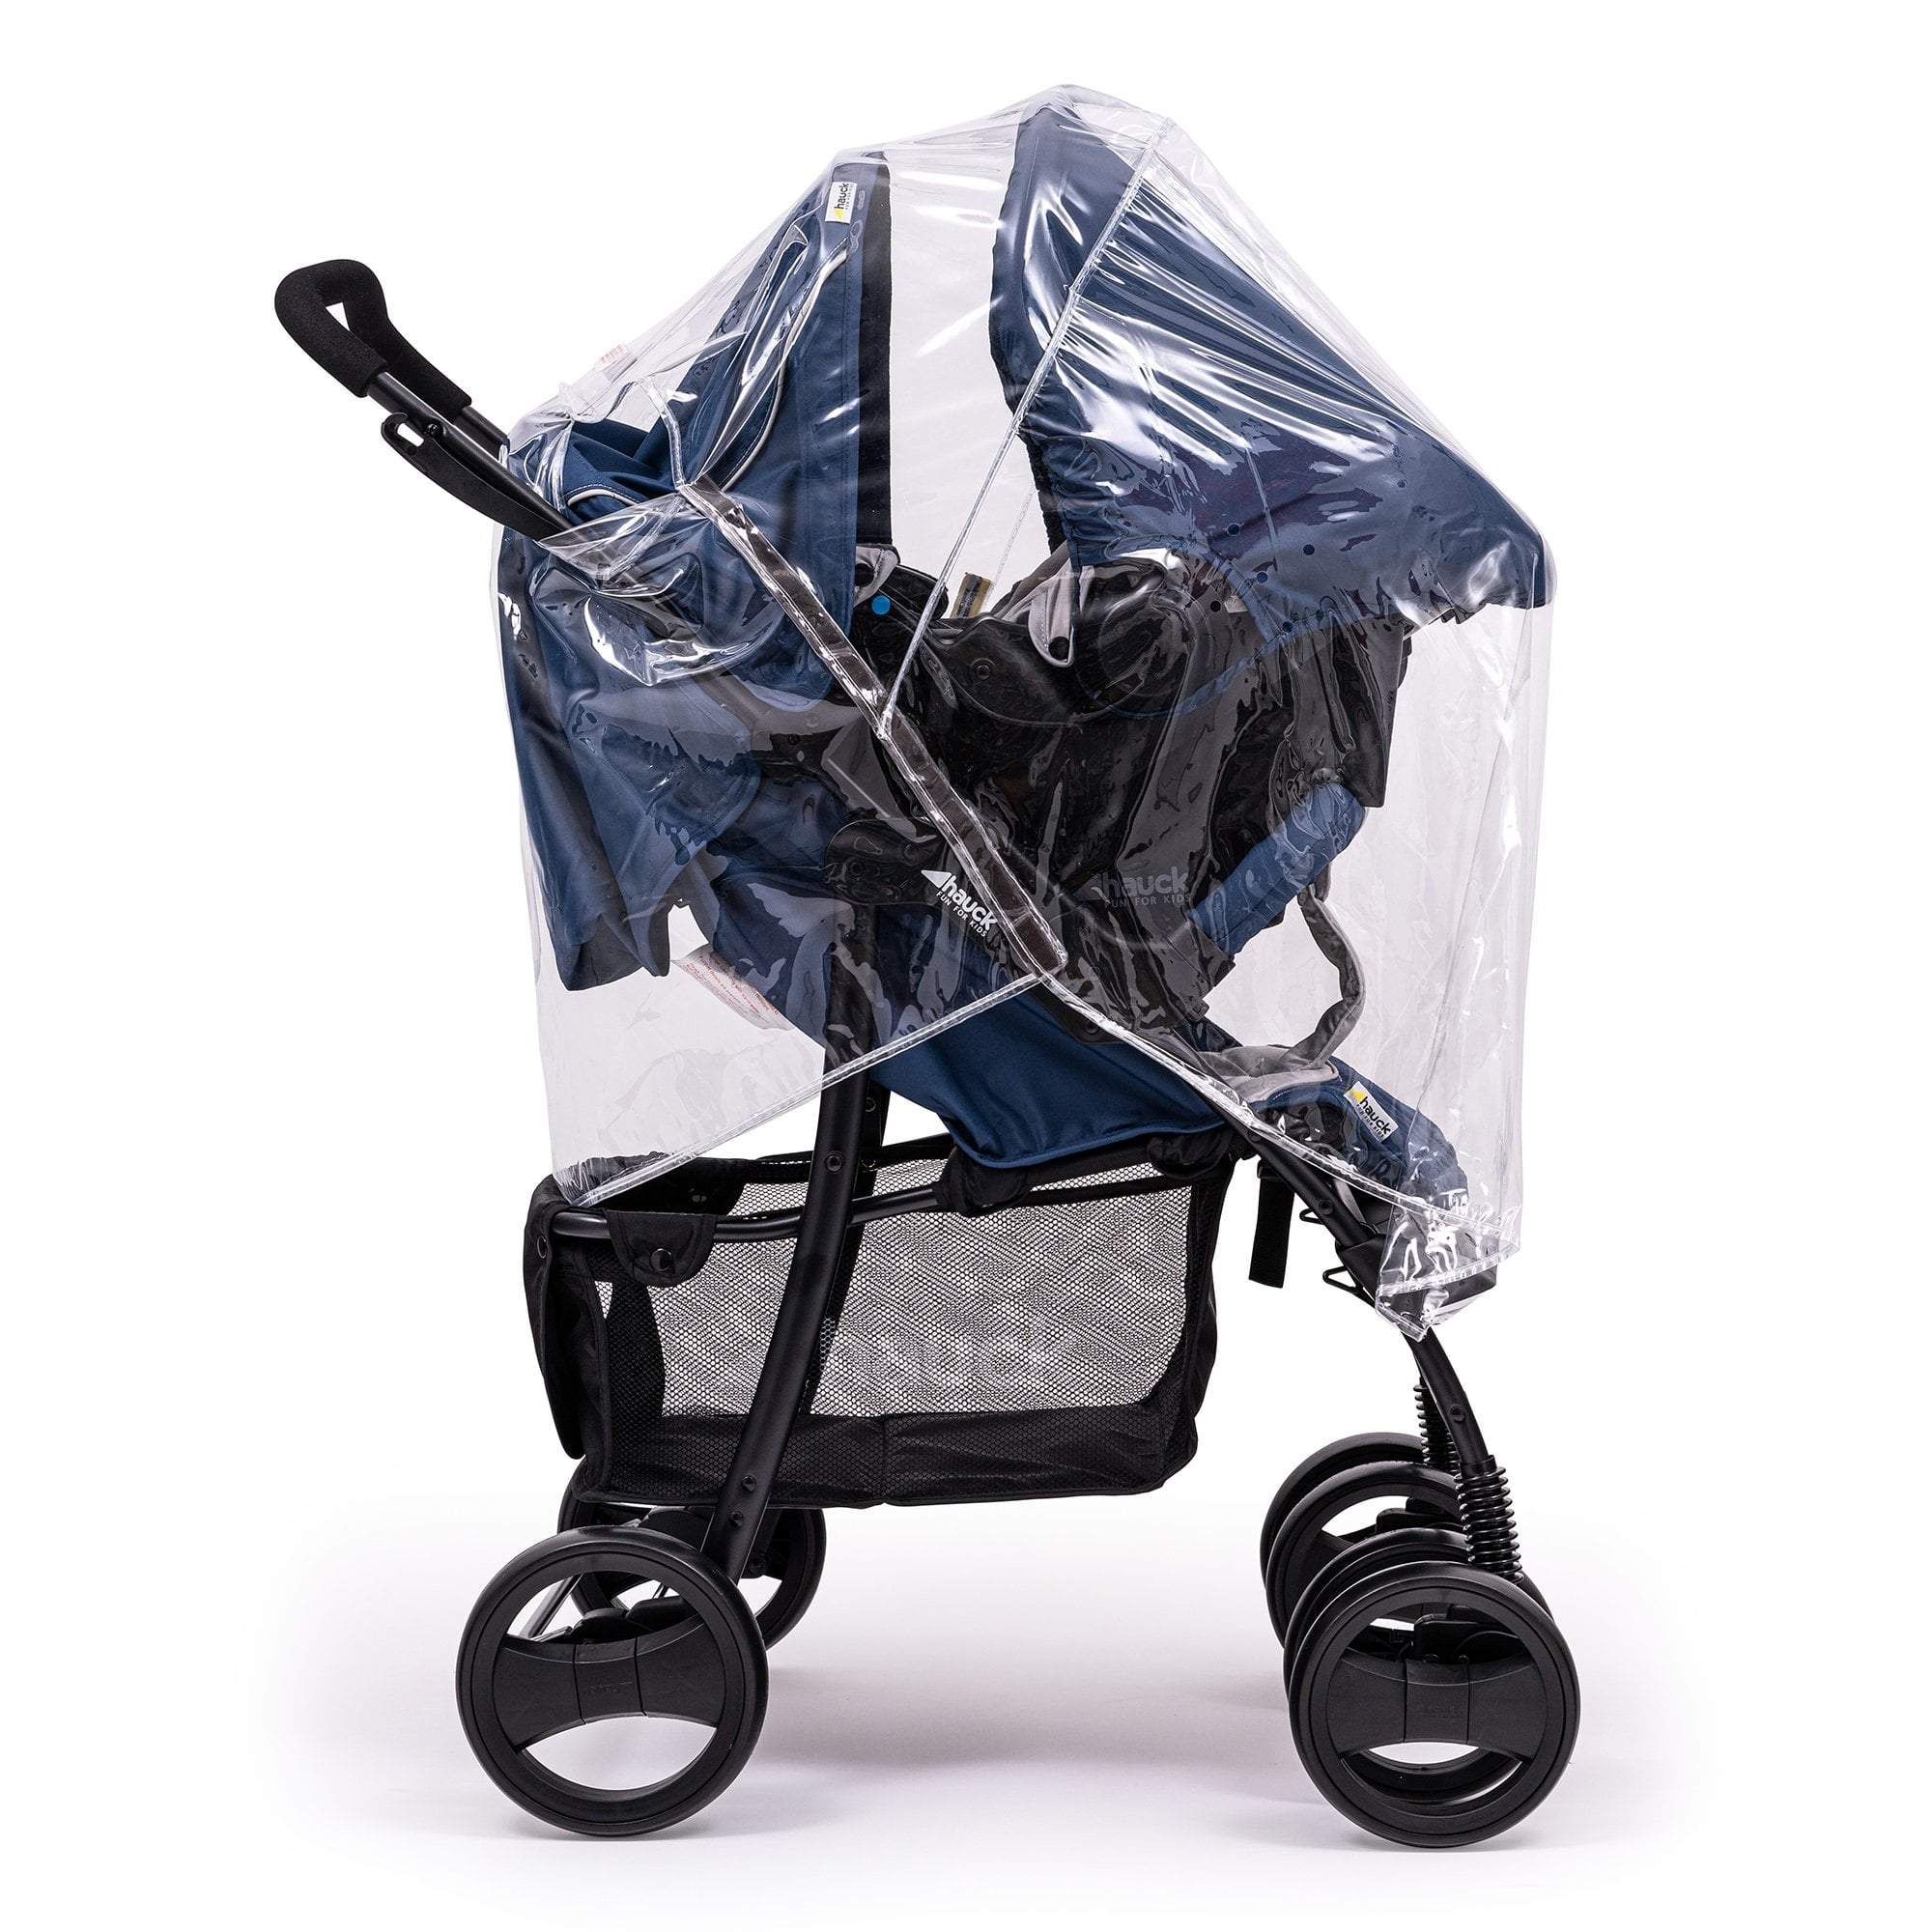 Travel System Raincover Compatible with Graco - Fits All Models - For Your Little One